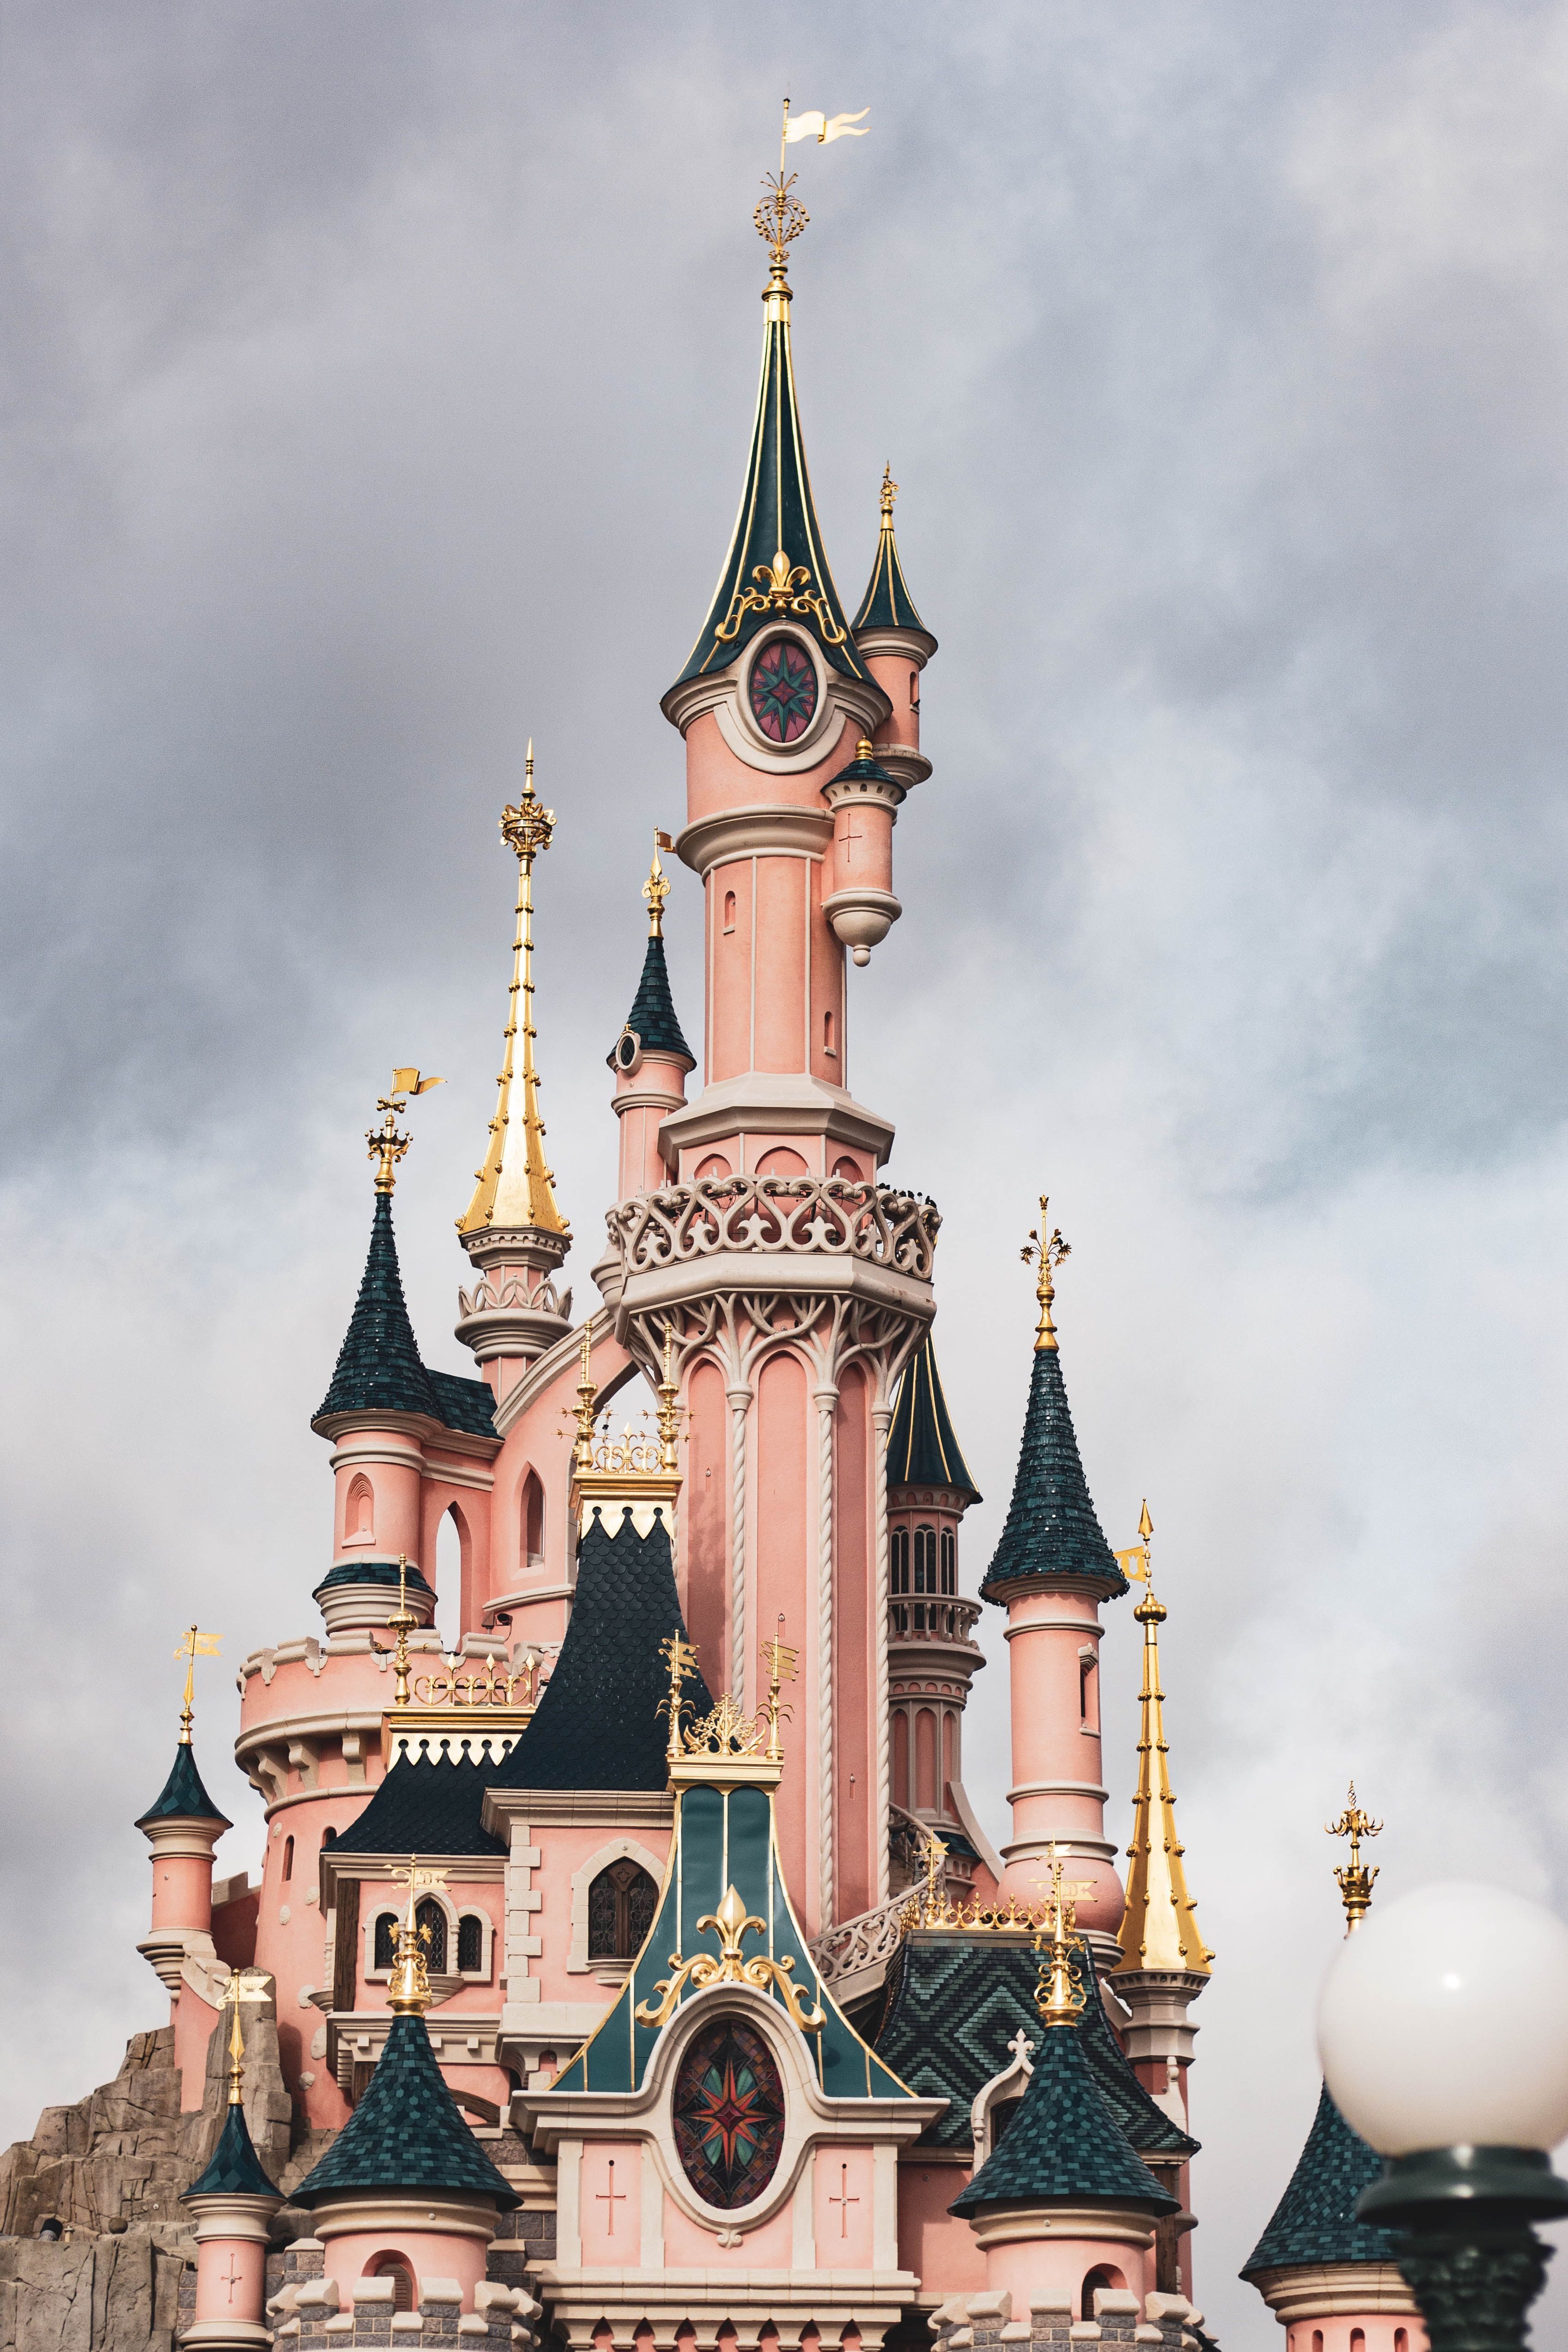 A large pink castle with clock tower - Castle, Disneyland